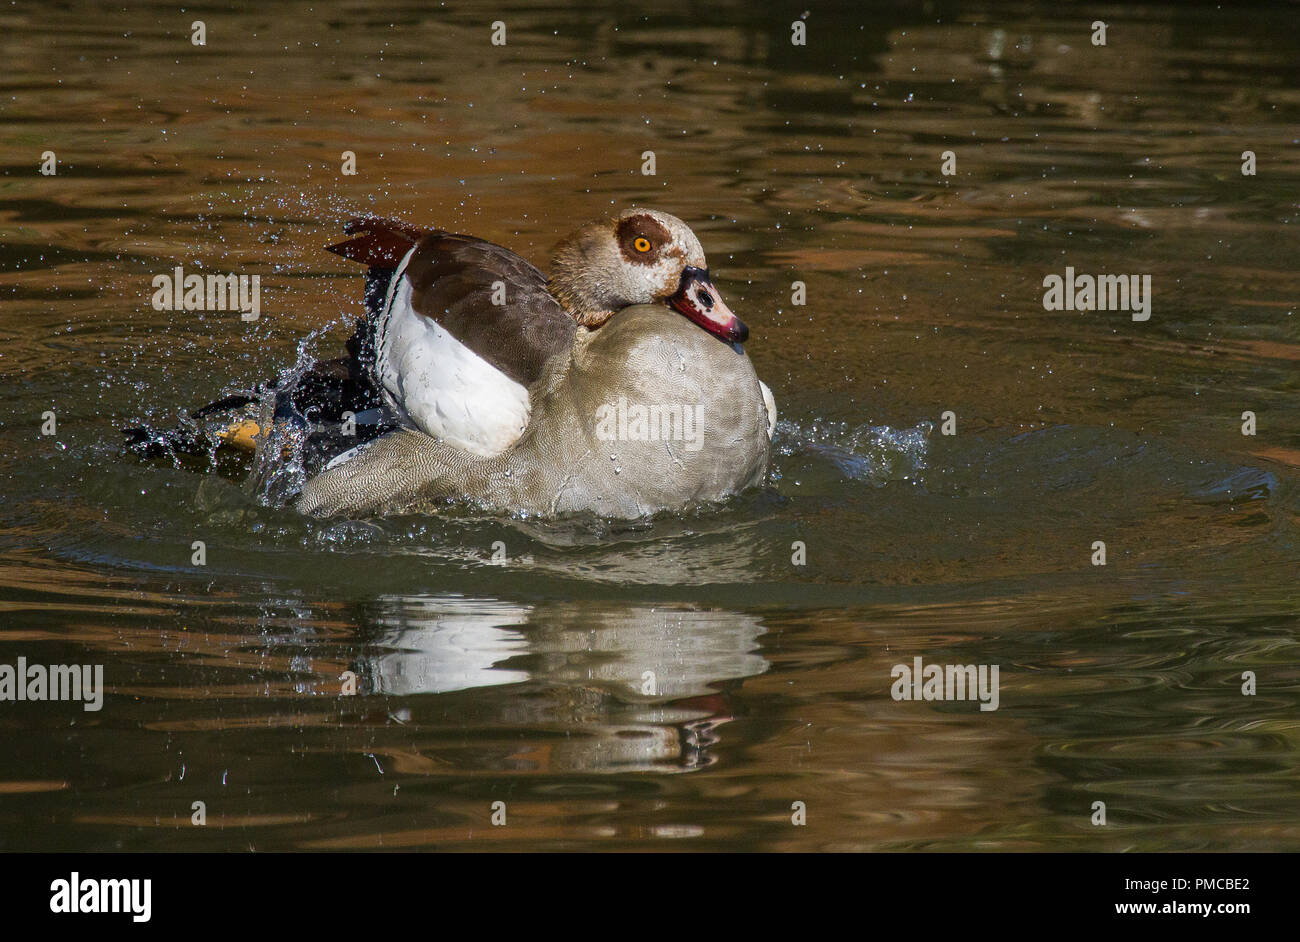 Egyptian goose photographed in Johannesburg, South Africa Stock Photo